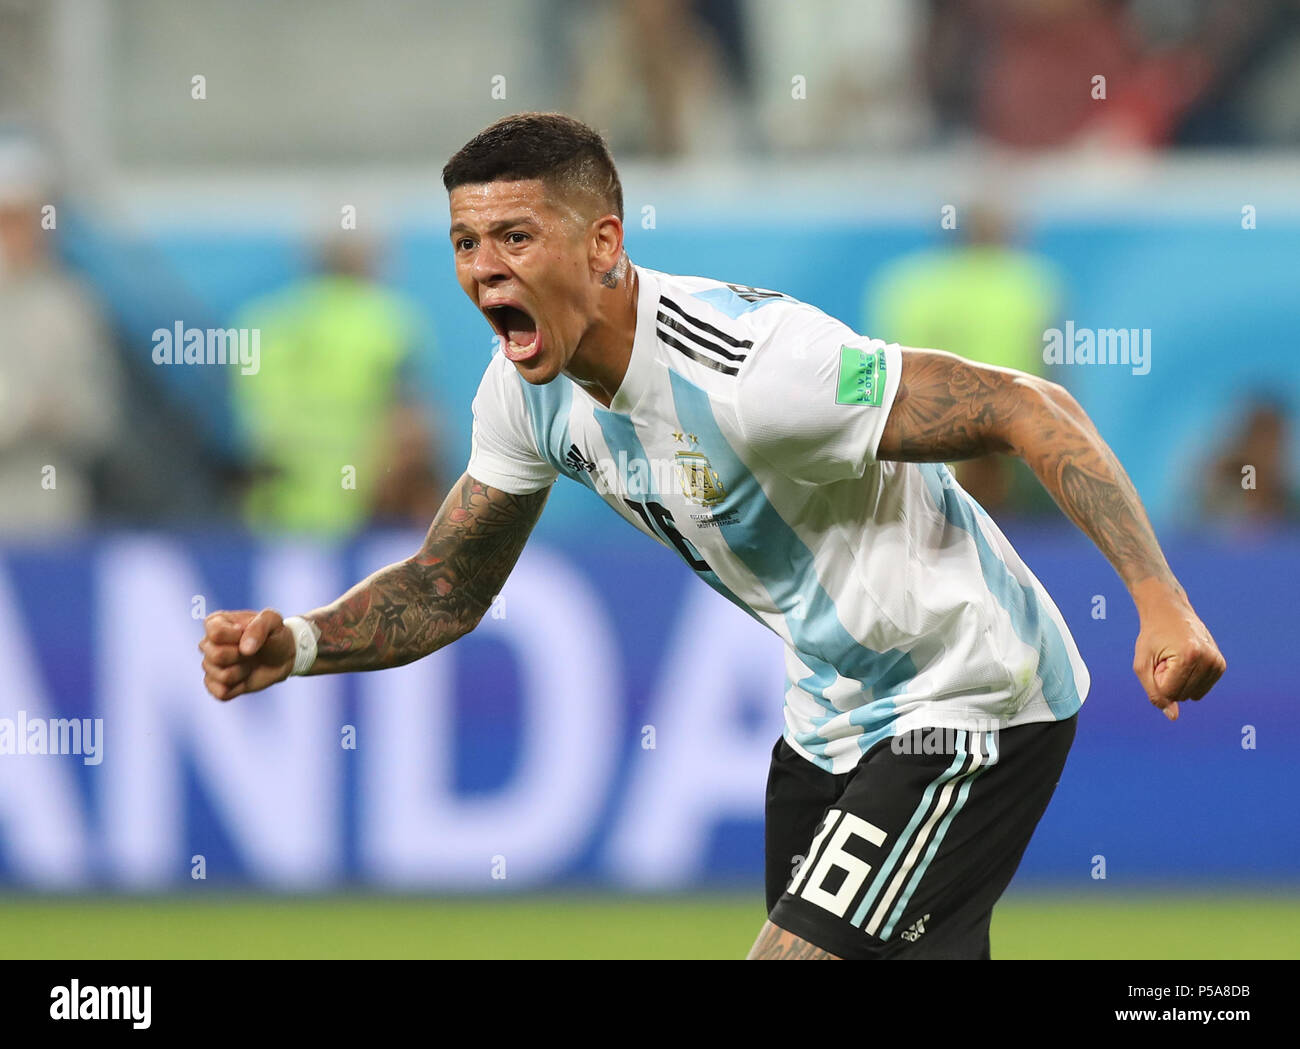 Saint Petersburg, Russia. 26th June, 2018. Marcos Rojo of Argentina celebrates scoring during the 2018 FIFA World Cup Group D match between Nigeria and Argentina in Saint Petersburg, Russia, June 26, 2018. Argentina won 2-1 and advanced to the round of 16. Credit: Yang Lei/Xinhua/Alamy Live News Stock Photo